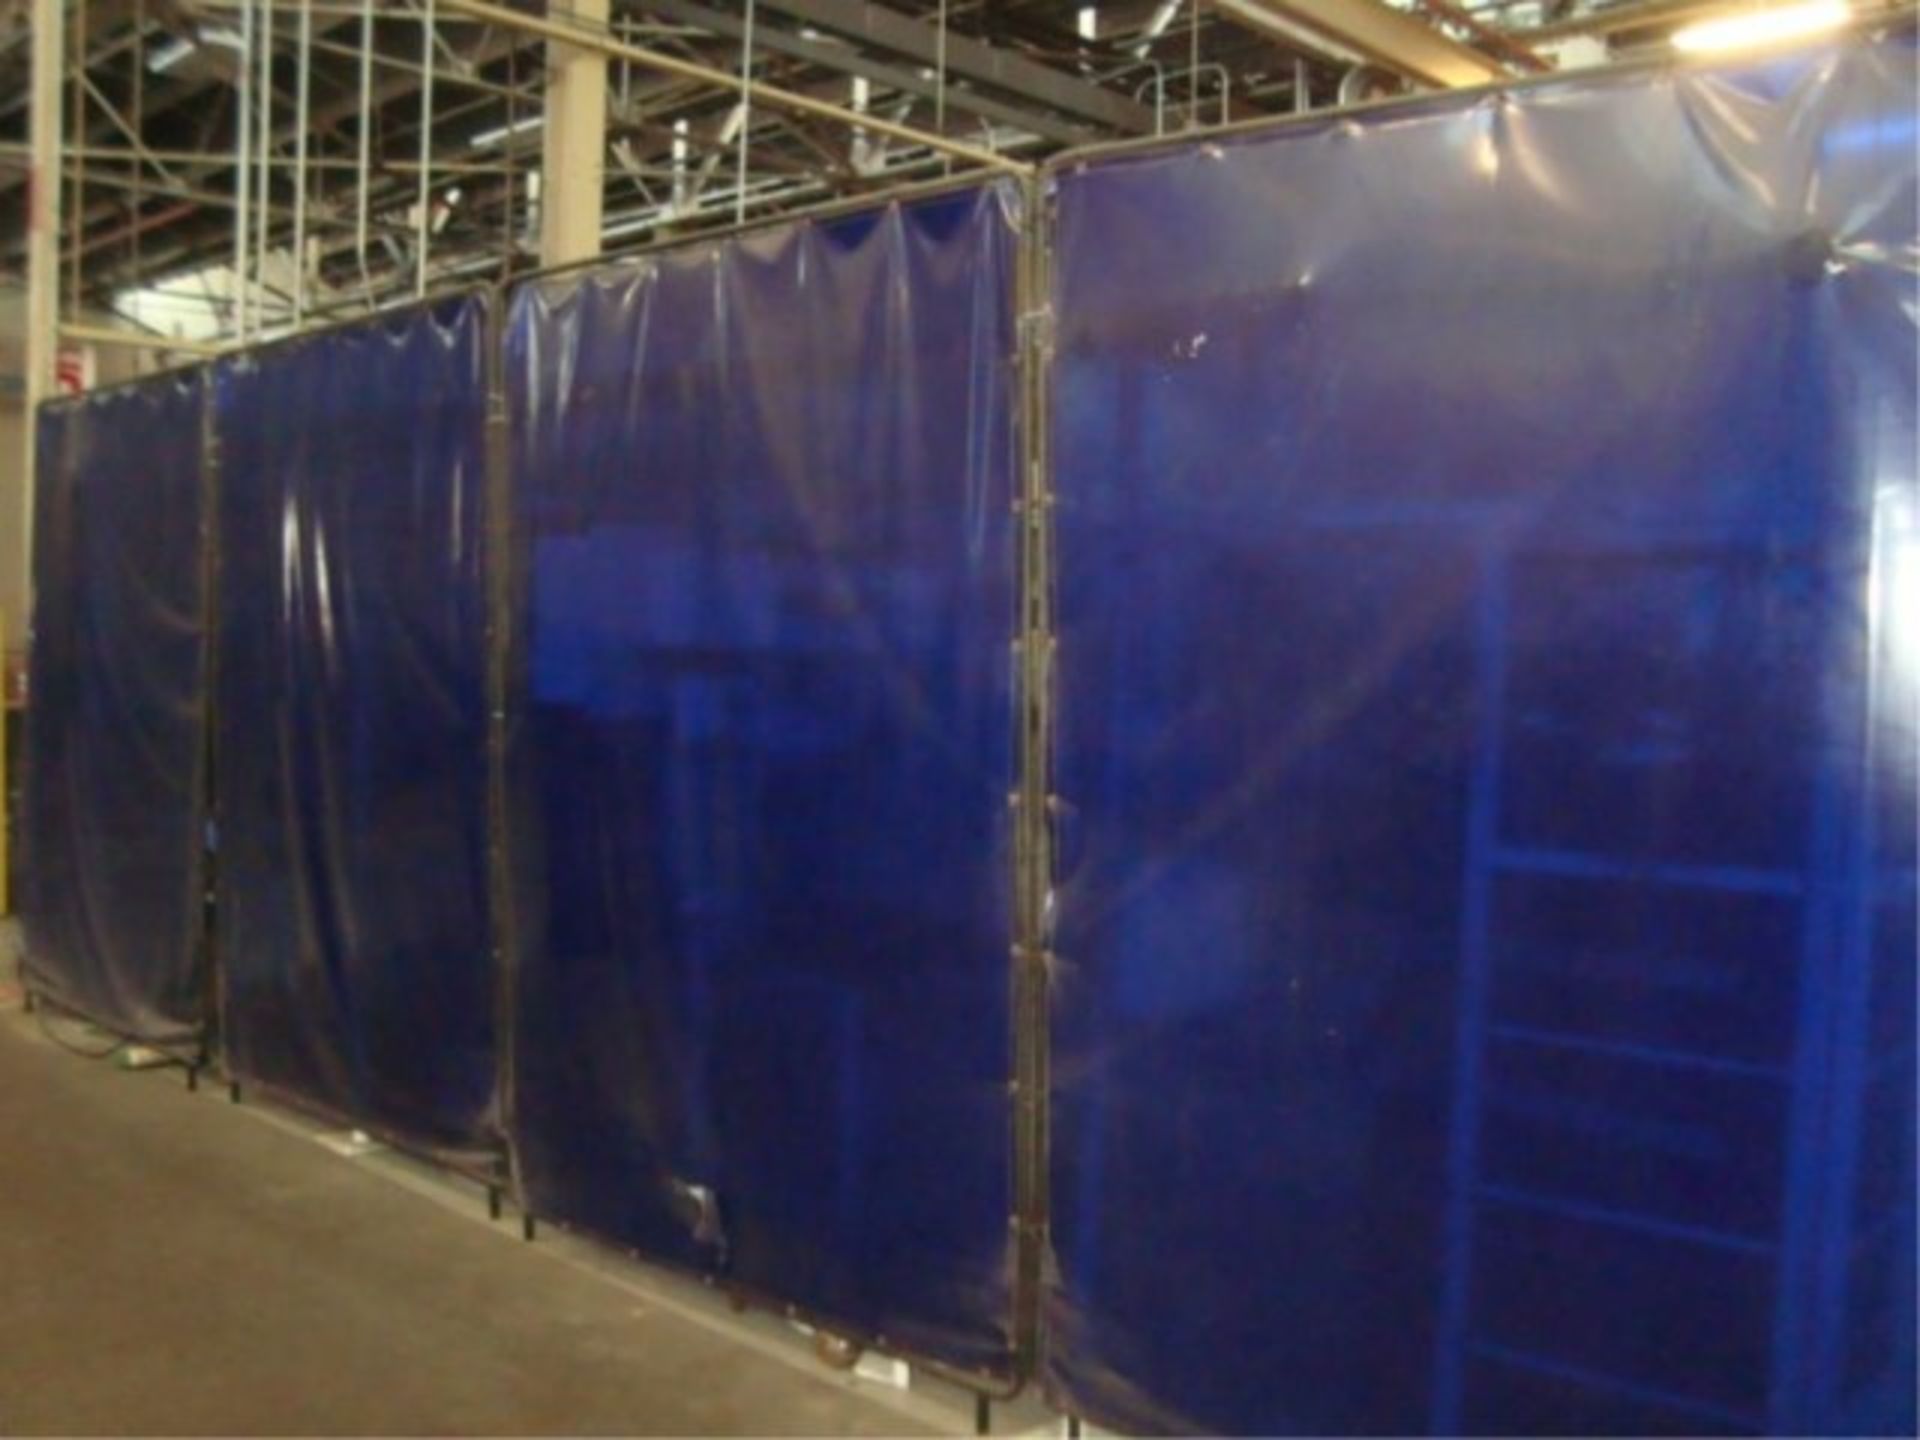 Weld Curtain Panels With Frame Stands - Image 4 of 4